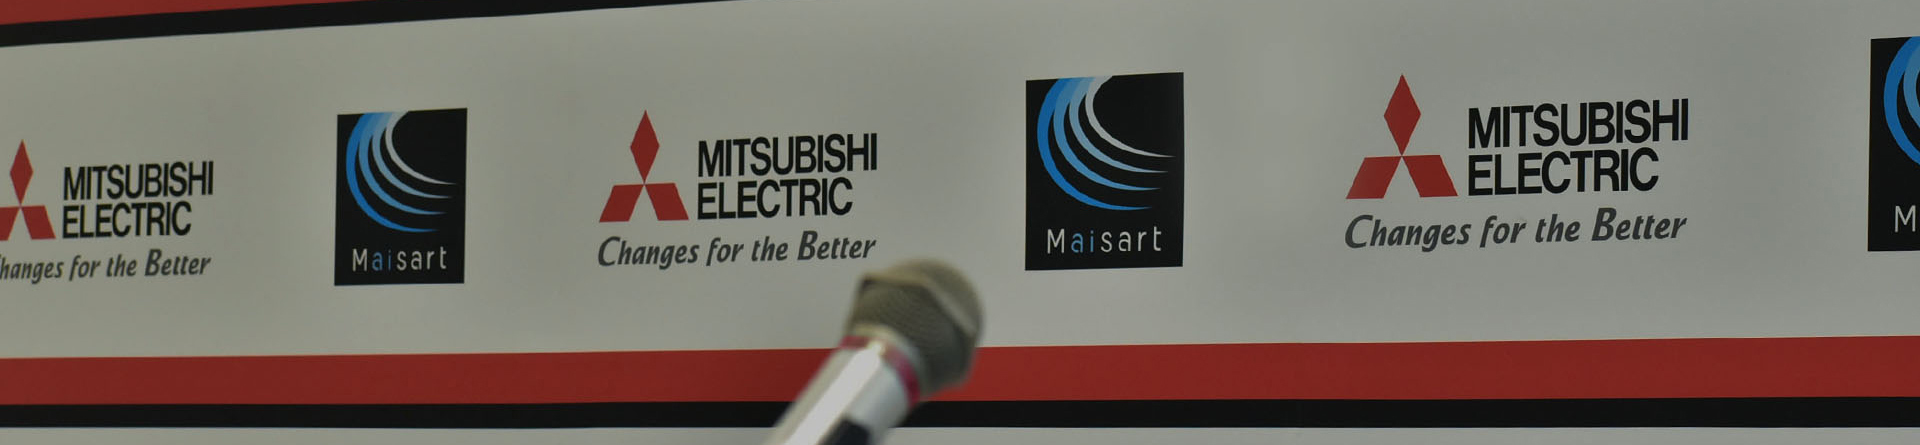 Mitsubishi Electric Zero Energy Test Facility "SUSTIE®" has obtained Platinum-level WELL Building Standard™ certification  